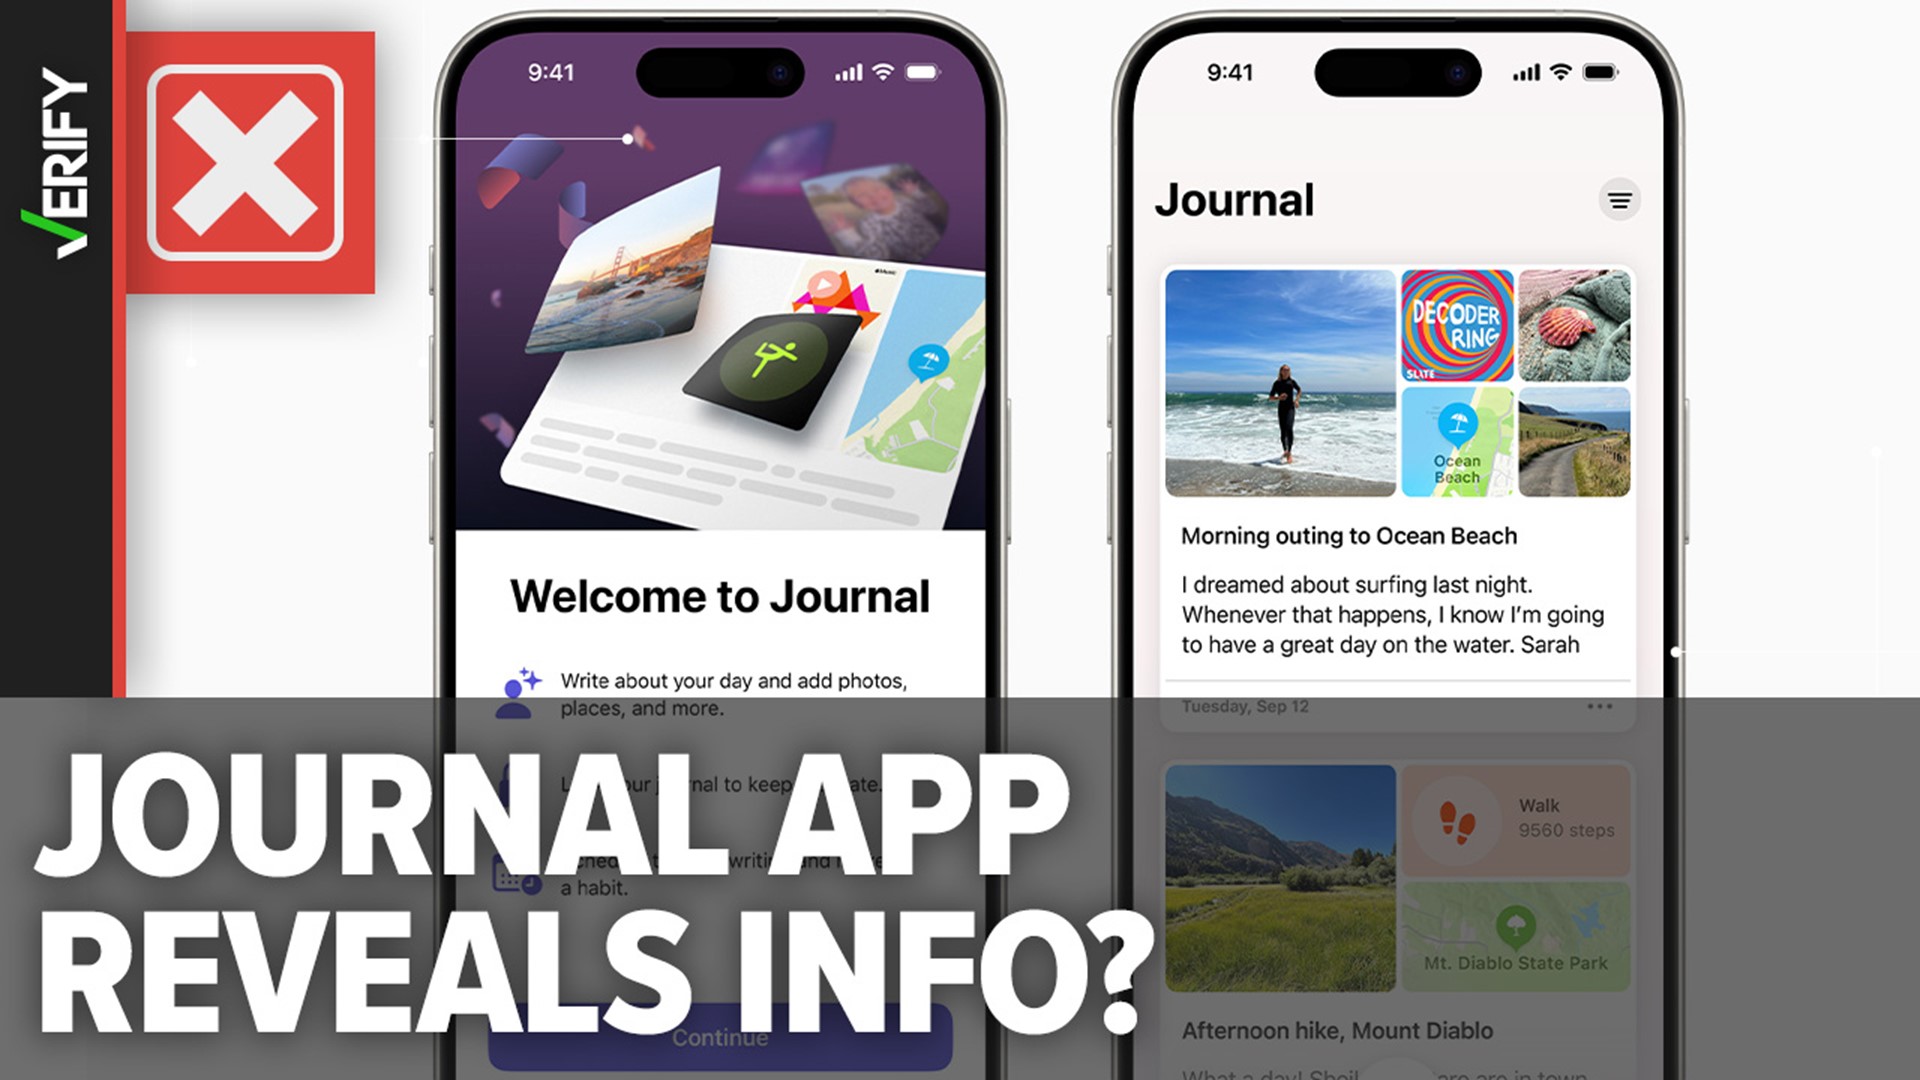 A new iPhone feature can suggest journaling topics based on nearby people who are in your contact list. It does not share your name or location with those people.